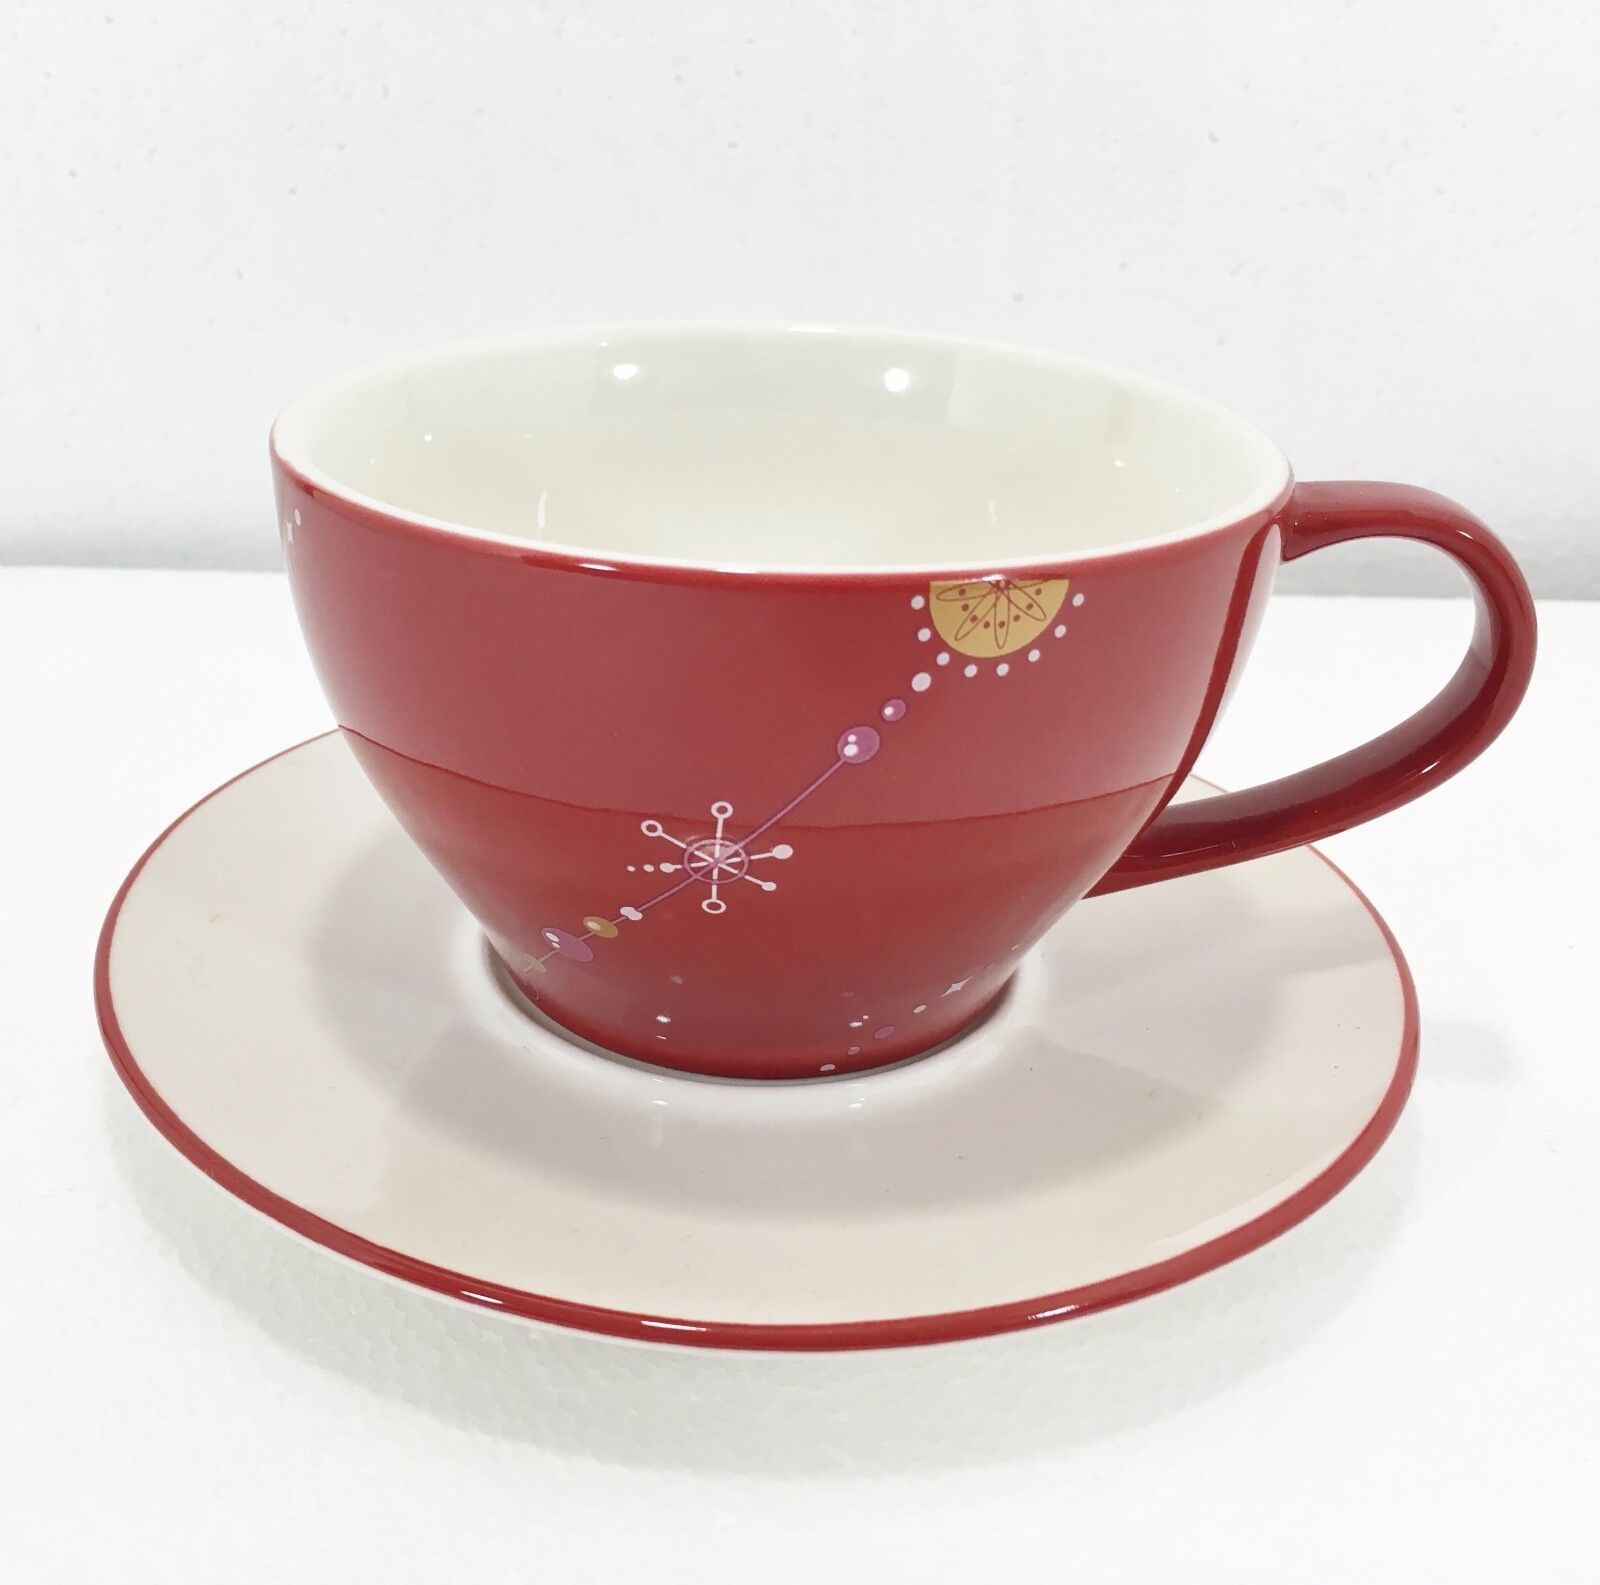 Starbucks Holiday 2006 Red Cup & Saucer Set 12 oz Gold & White Snowflakes Coffee - $25.97